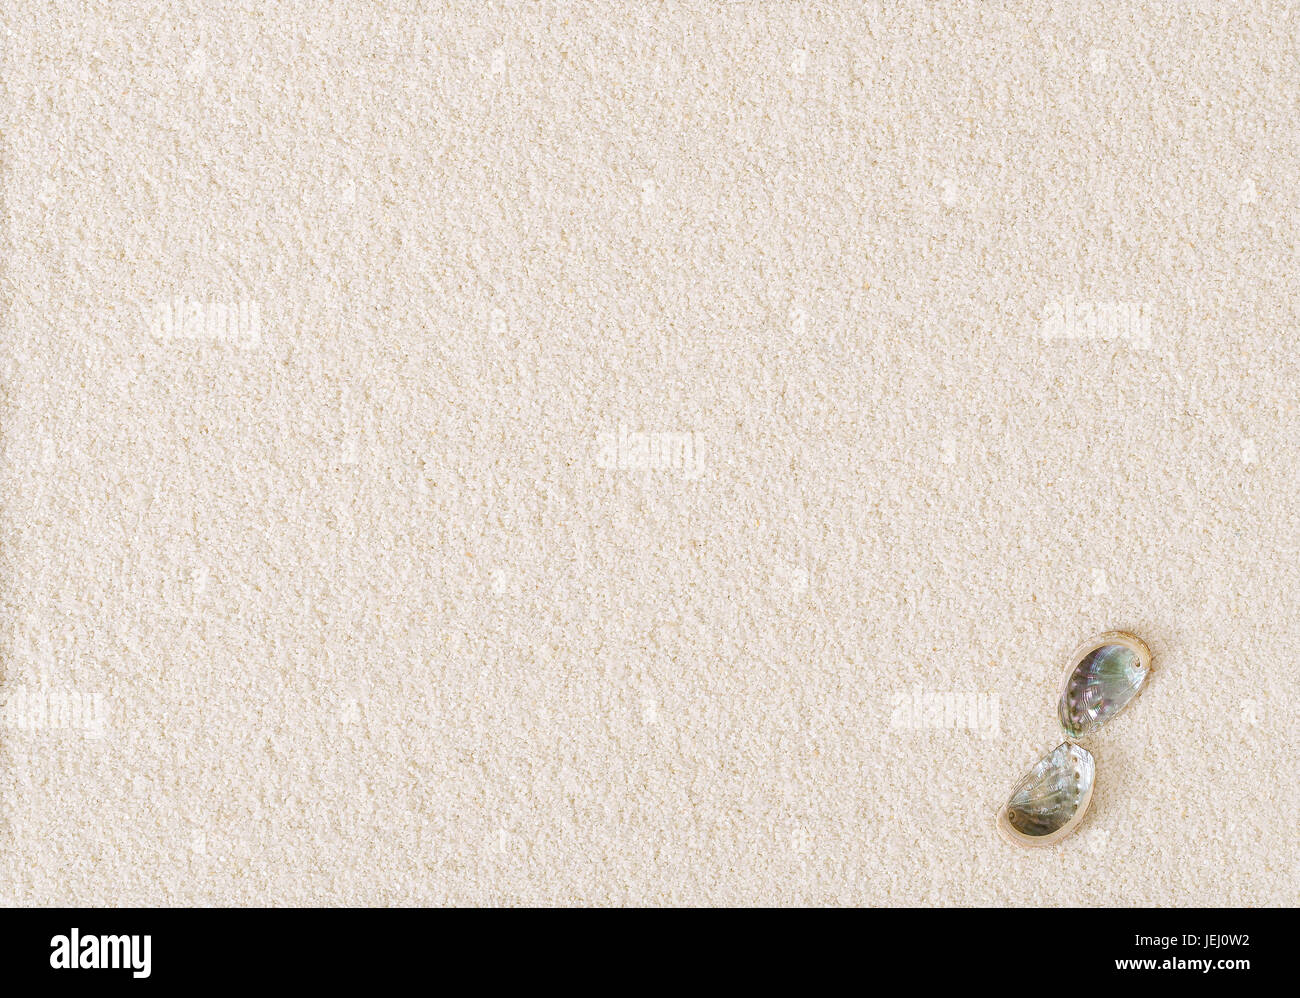 Two abalone shells on flat white sand surface. Ormer, Haliotis, a sea snail and marine gastropod mollusc with open spiral structure. Stock Photo